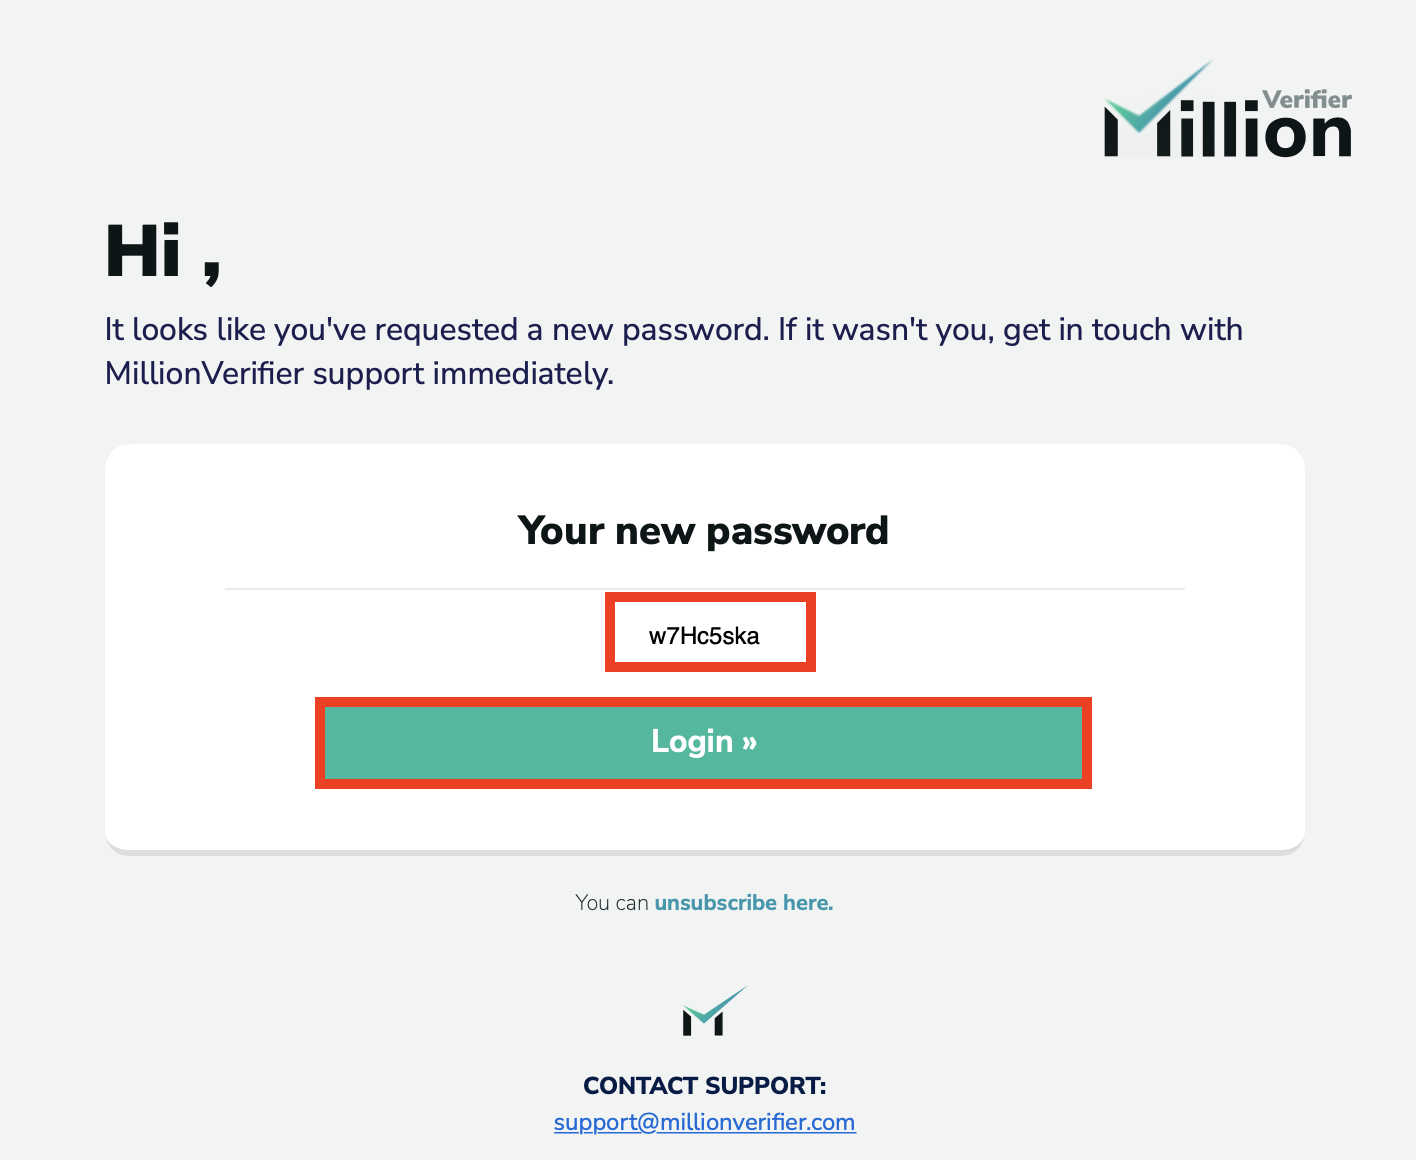 New password email from MillionVerifier